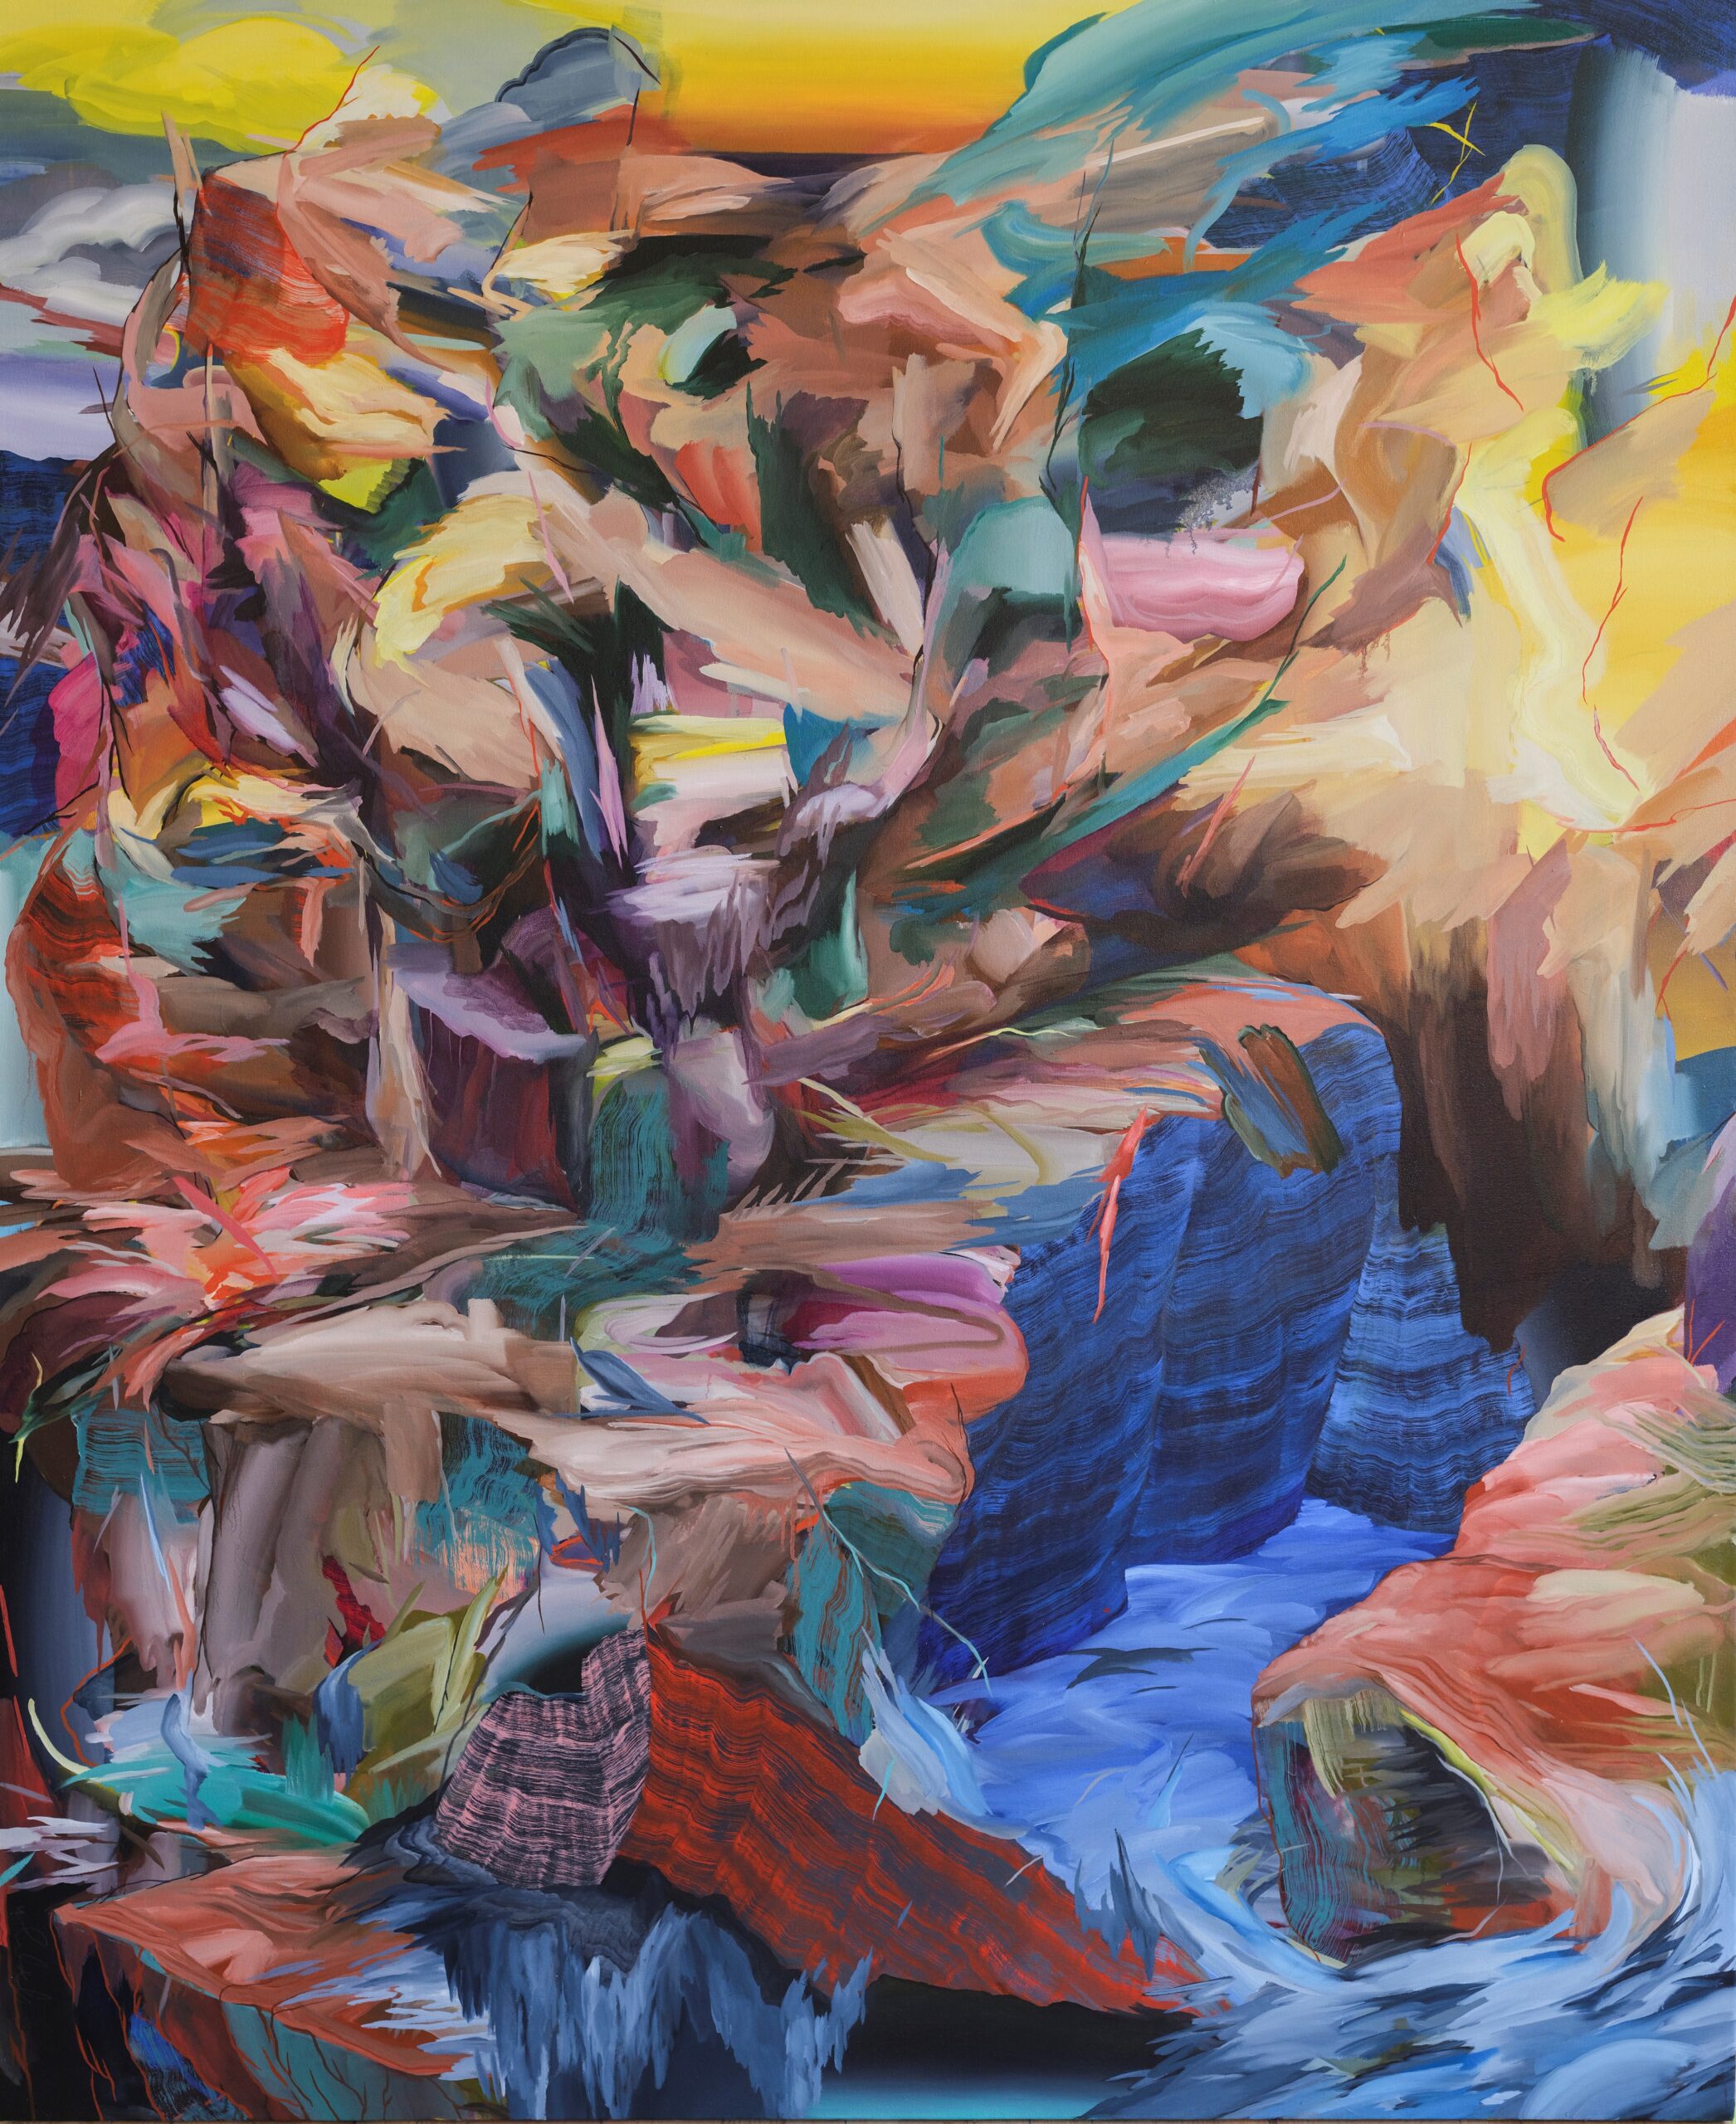 
							

									Steven J Yazzie									Untitled Forces of Nature 2023									oil on canvas<br />
78 x 64 inches									


							